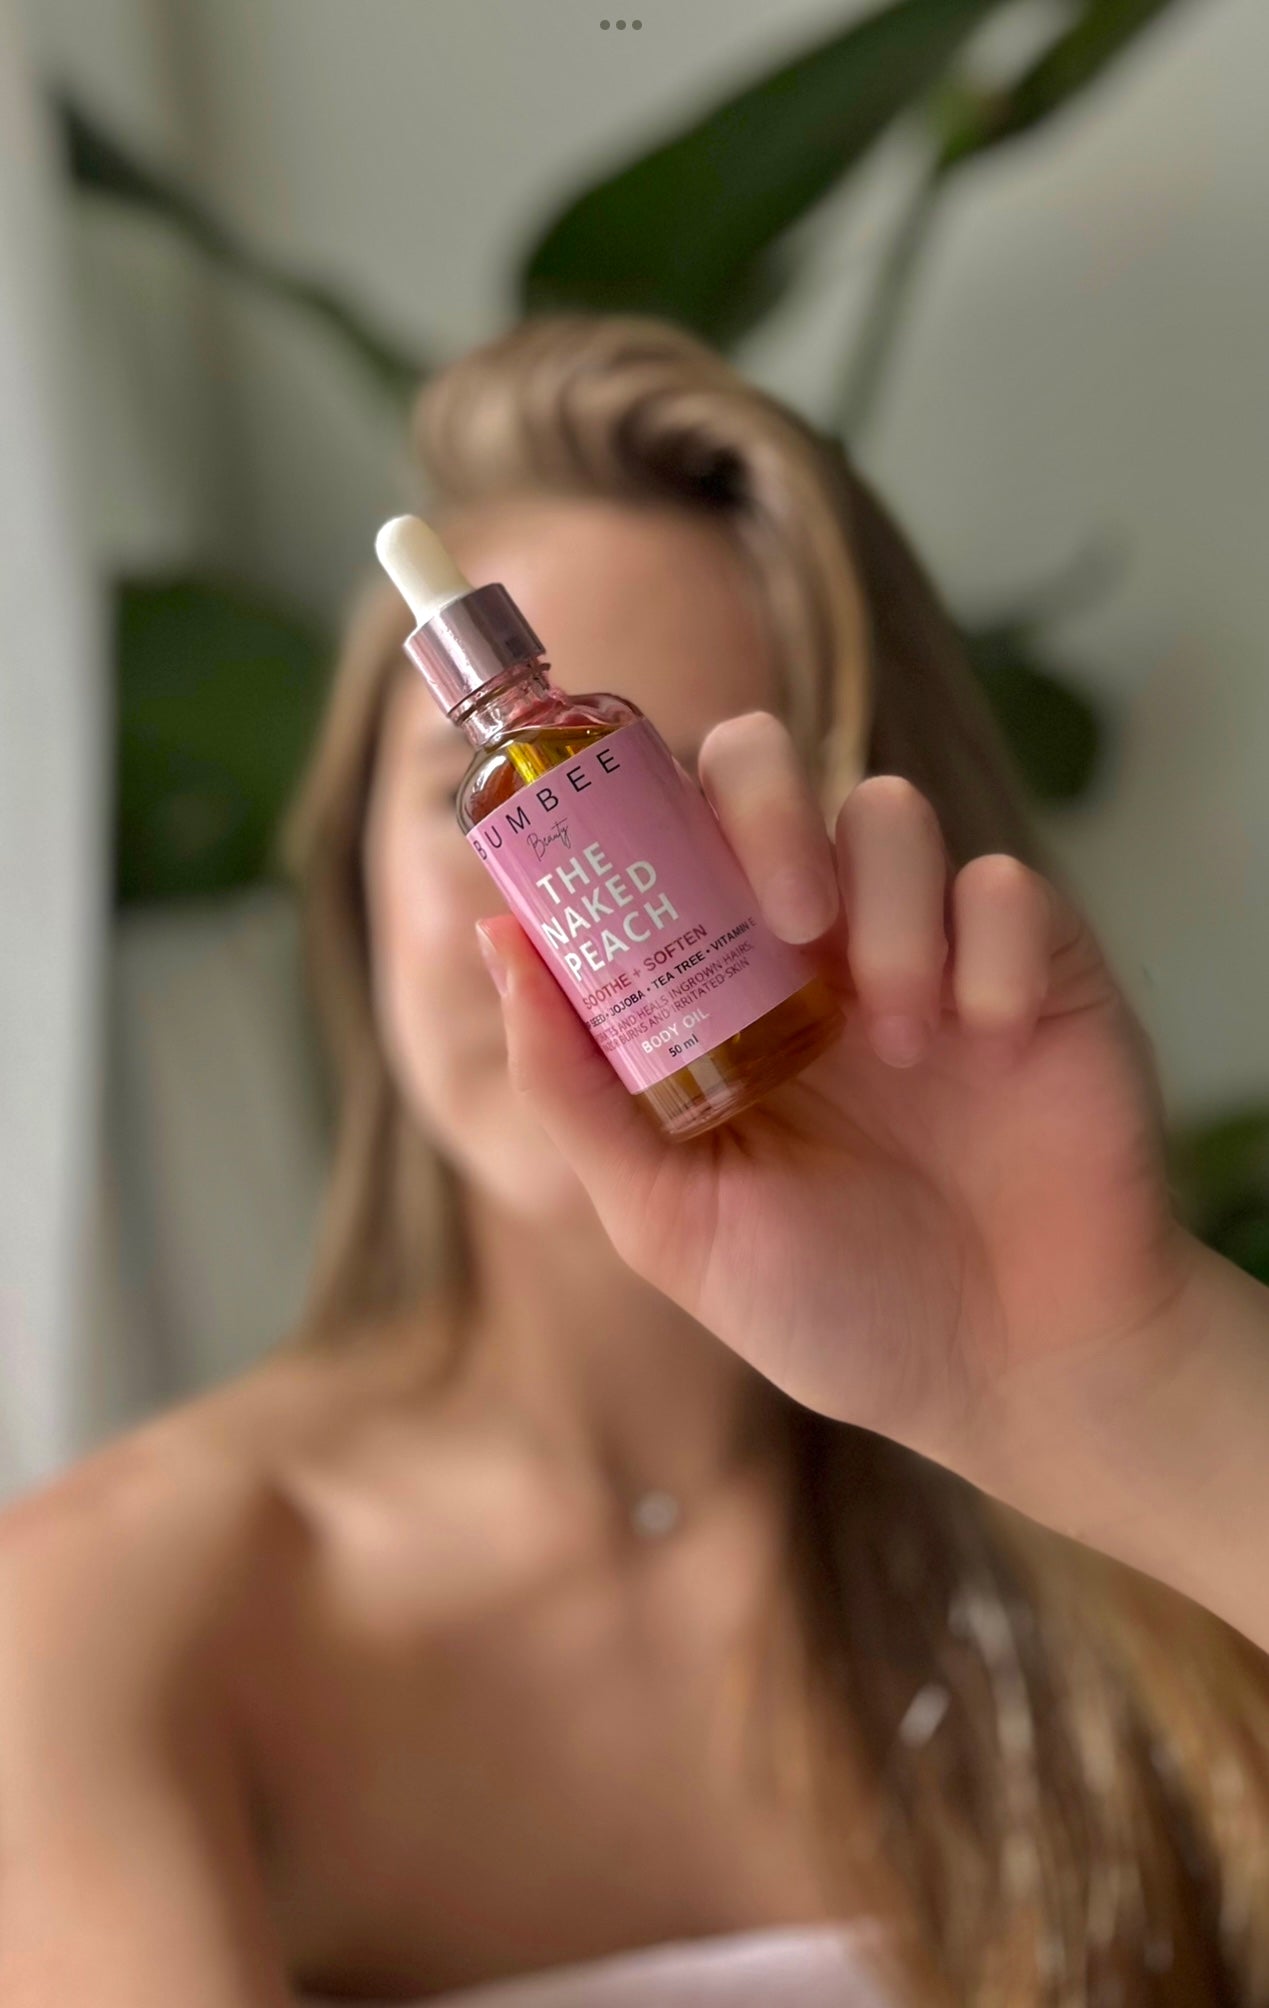 A girl holds a bottle of 'Naked Peach' body oil in front of her face, with the focus on the oil bottle. The image highlights the product as the key solution for addressing skin concerns such as irritation, ingrown hairs, and body acne, promising a clearer complexion and smoother skin